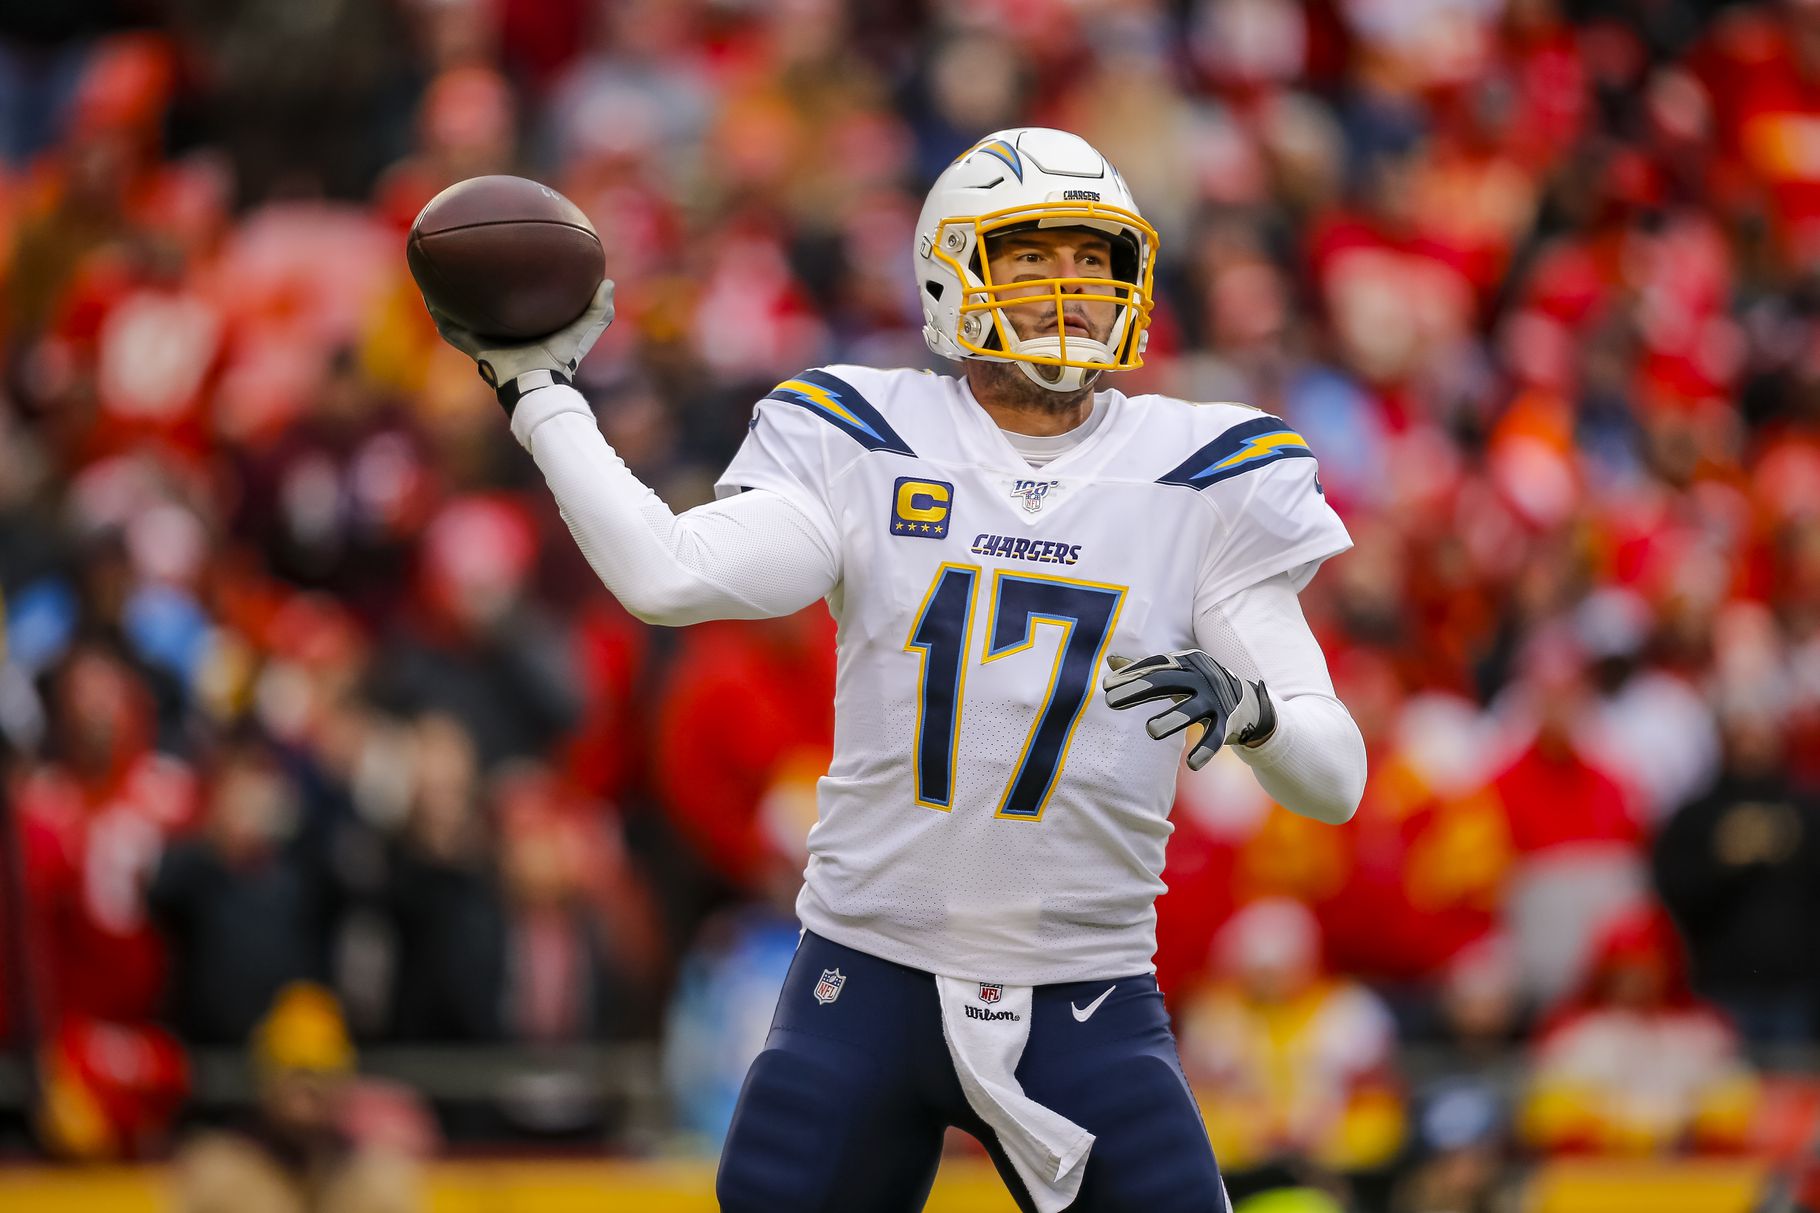 Free Agency Effects- Phillip Rivers